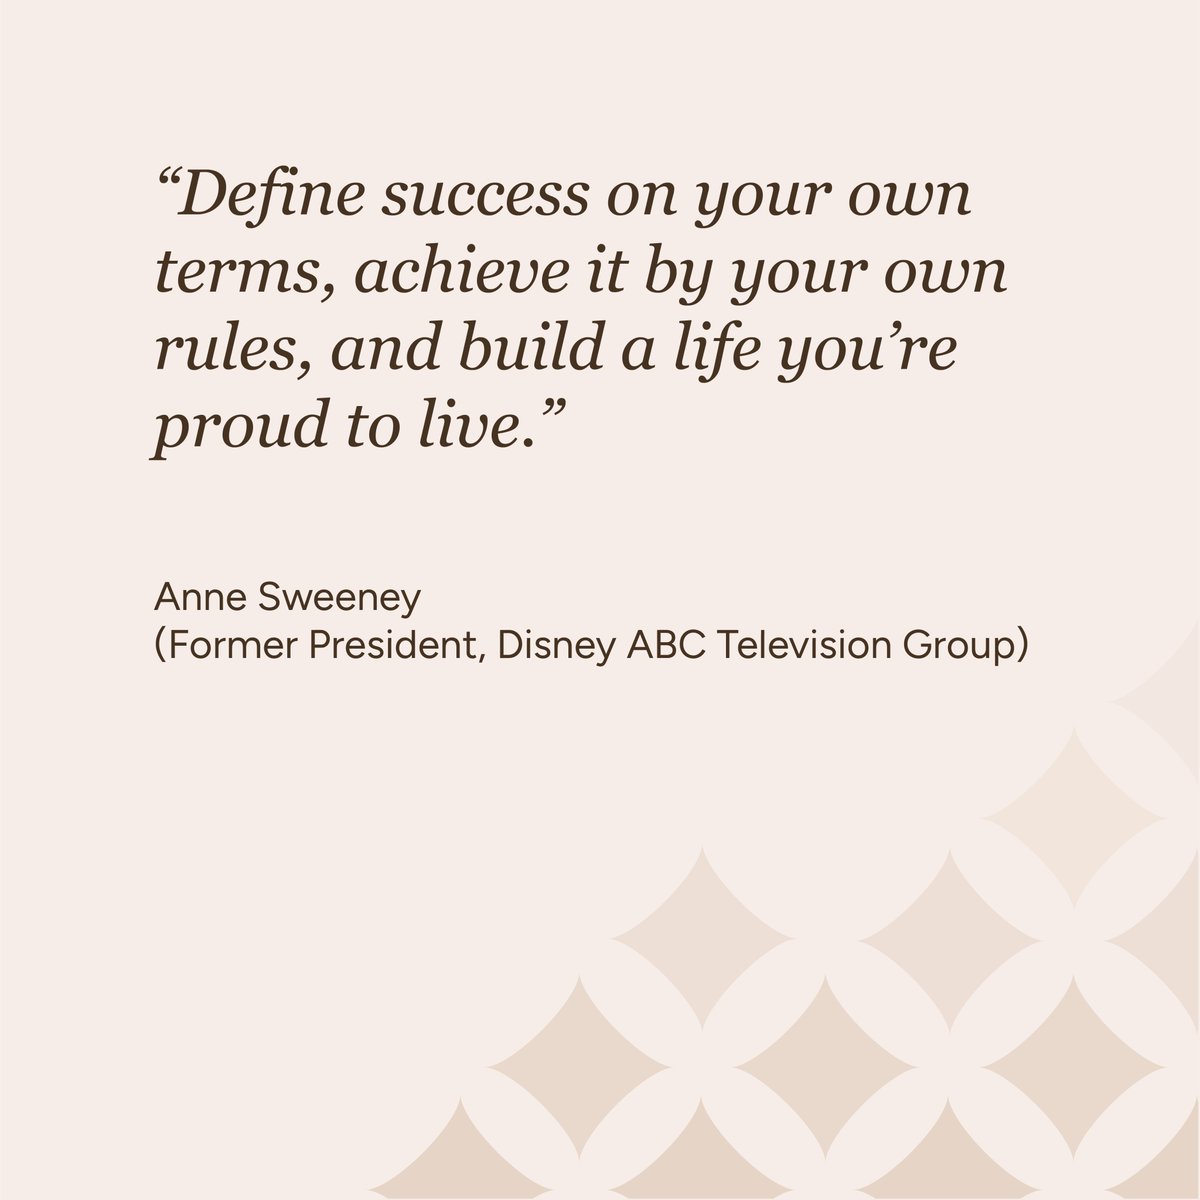 Starting the week with these wise words from Anne Sweeney to set the tone. As we embark on a new week, let us remember that success is not determined by our missteps but by our achievements.

#Leadership #LeadershipTips #WeeklyInspiration #SpeakWithJulie